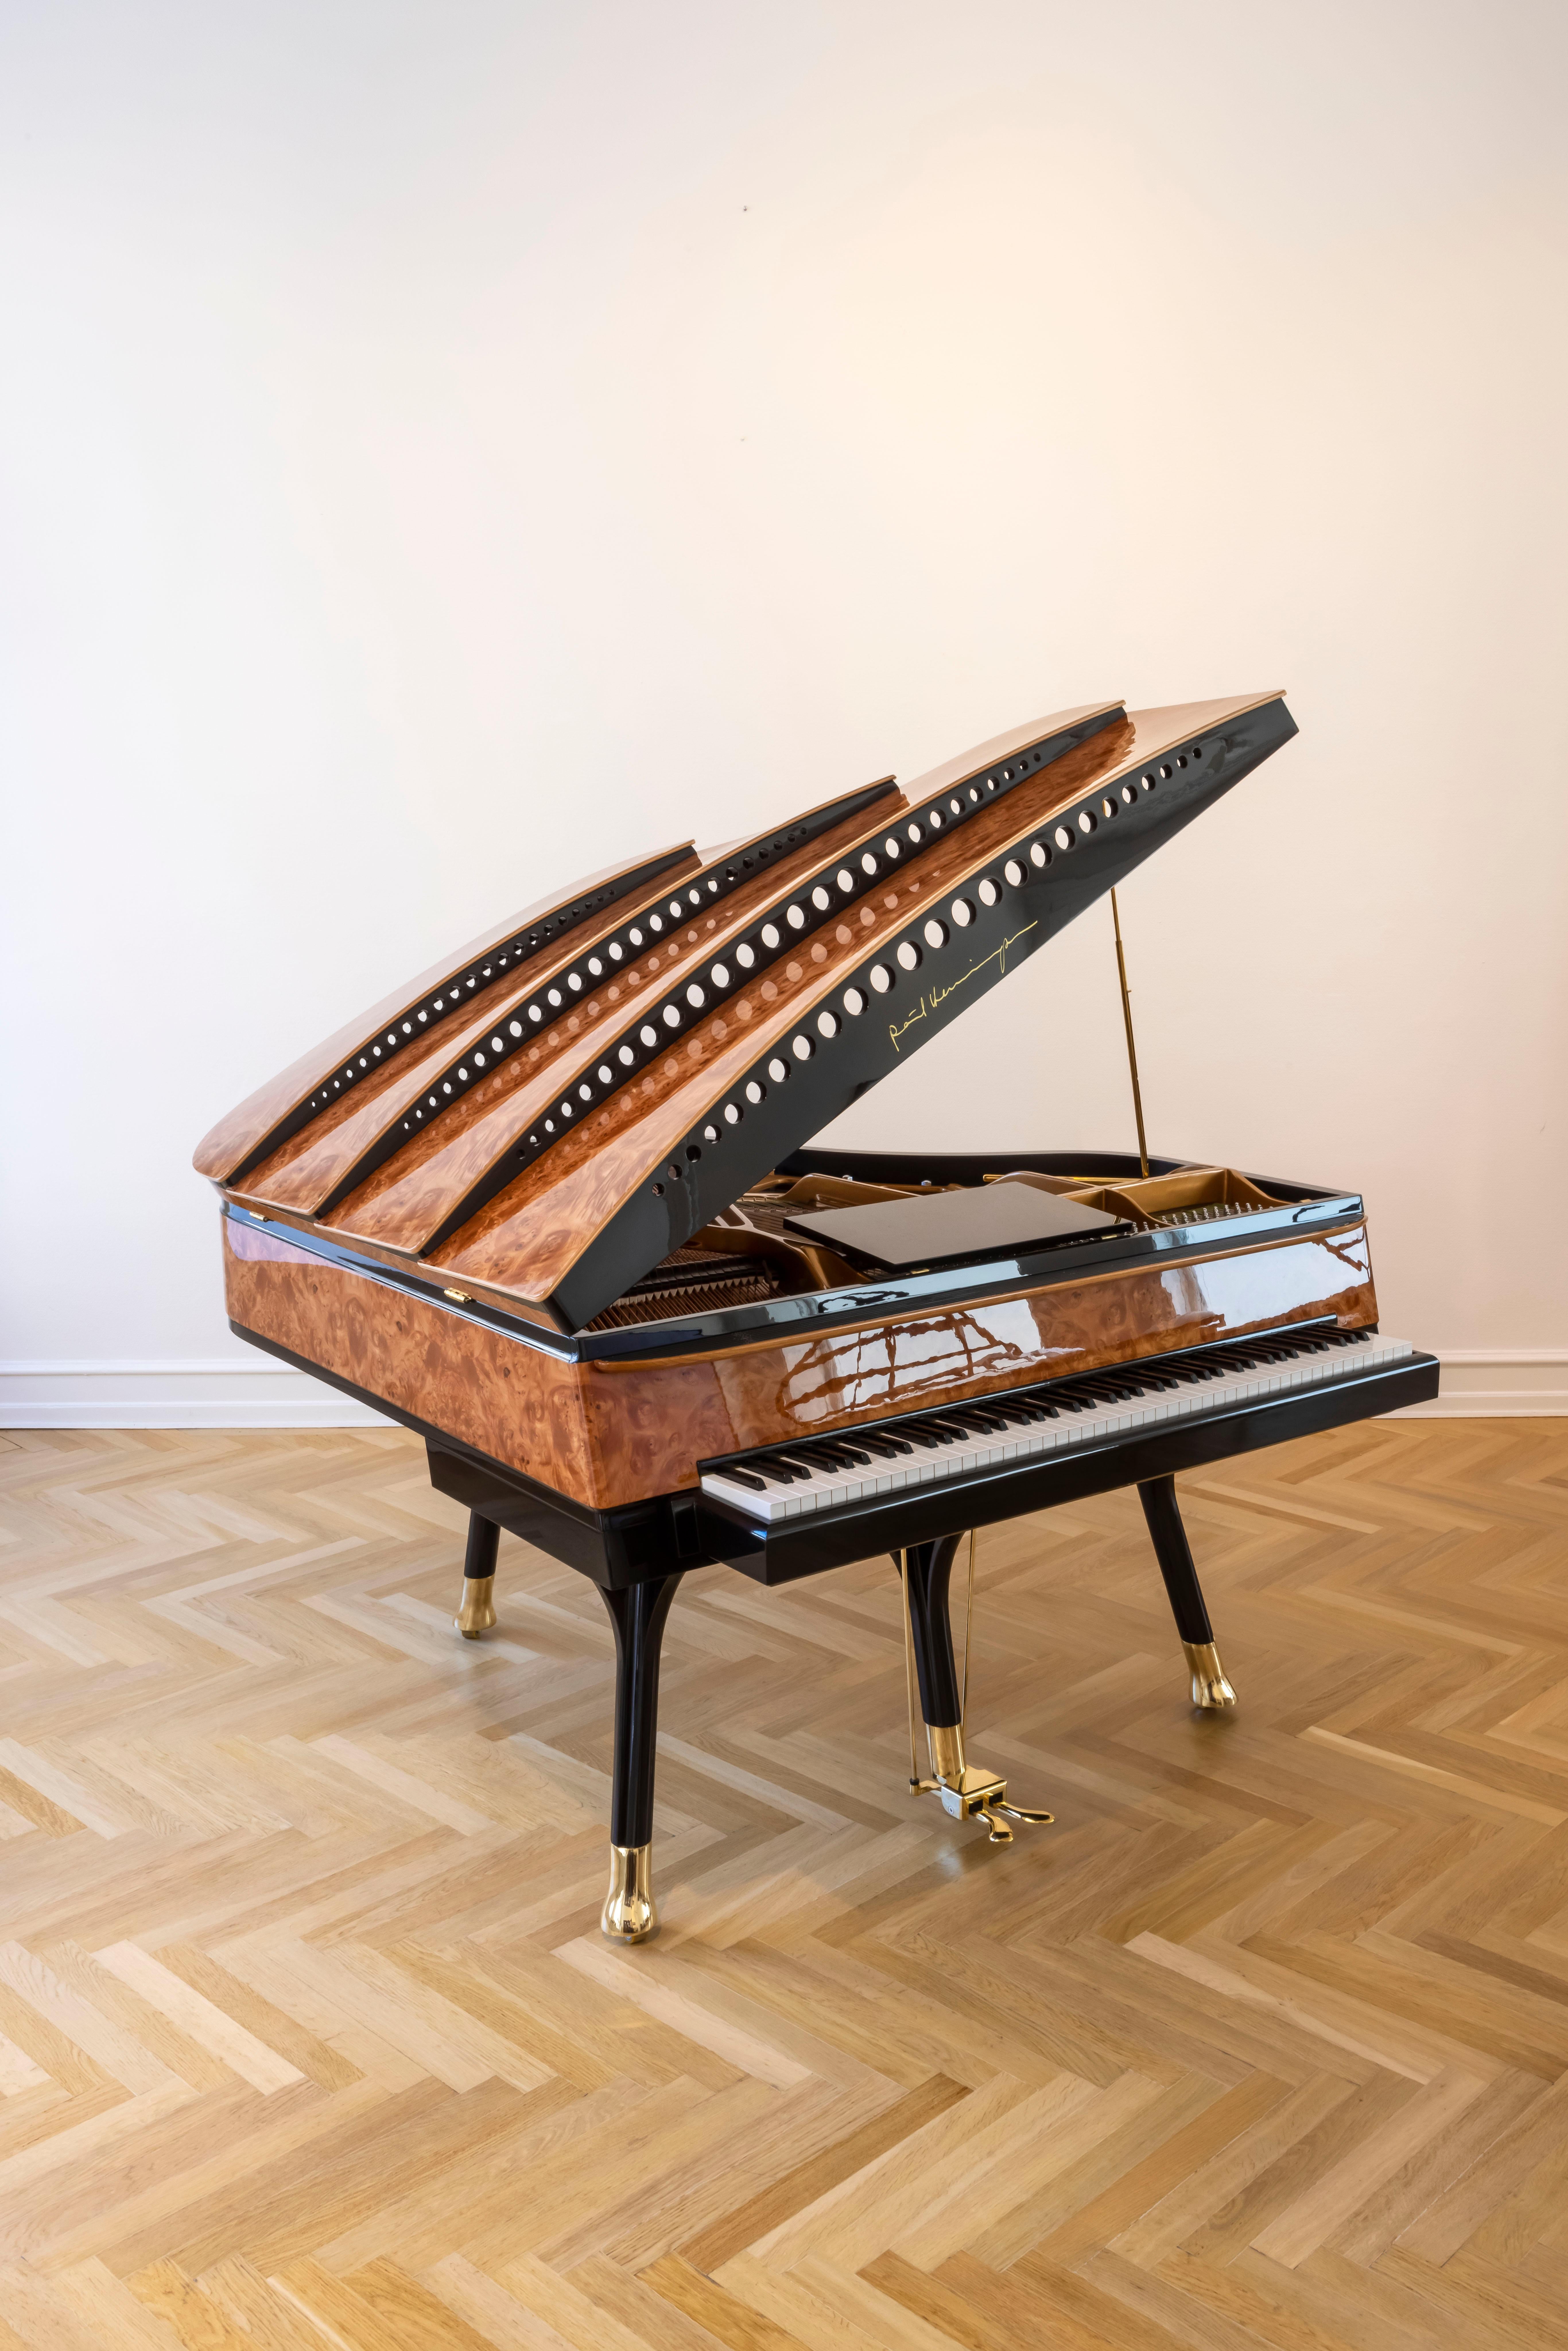 - All prices are listed ex works.
- 5 year guarantee.
- We regularly crate, ship and install PH Pianos worldwide with full insurance.

This gorgeous new PH Bow Grand Piano, finished in American Red Maple Burl, is an incredible instrument first